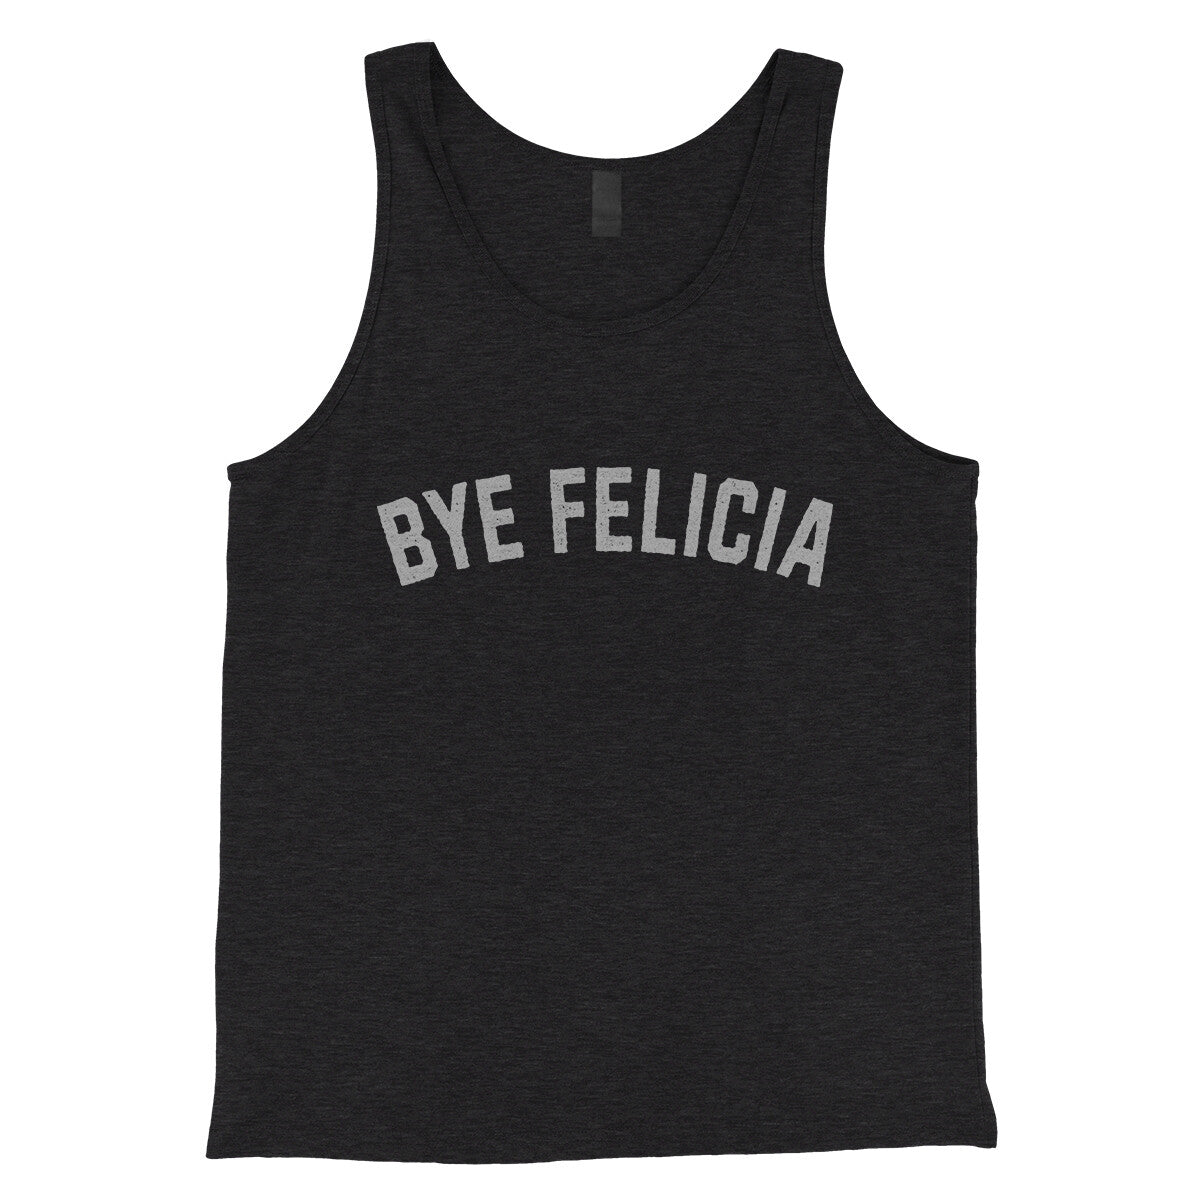 Bye Felicia in Charcoal Black TriBlend Color